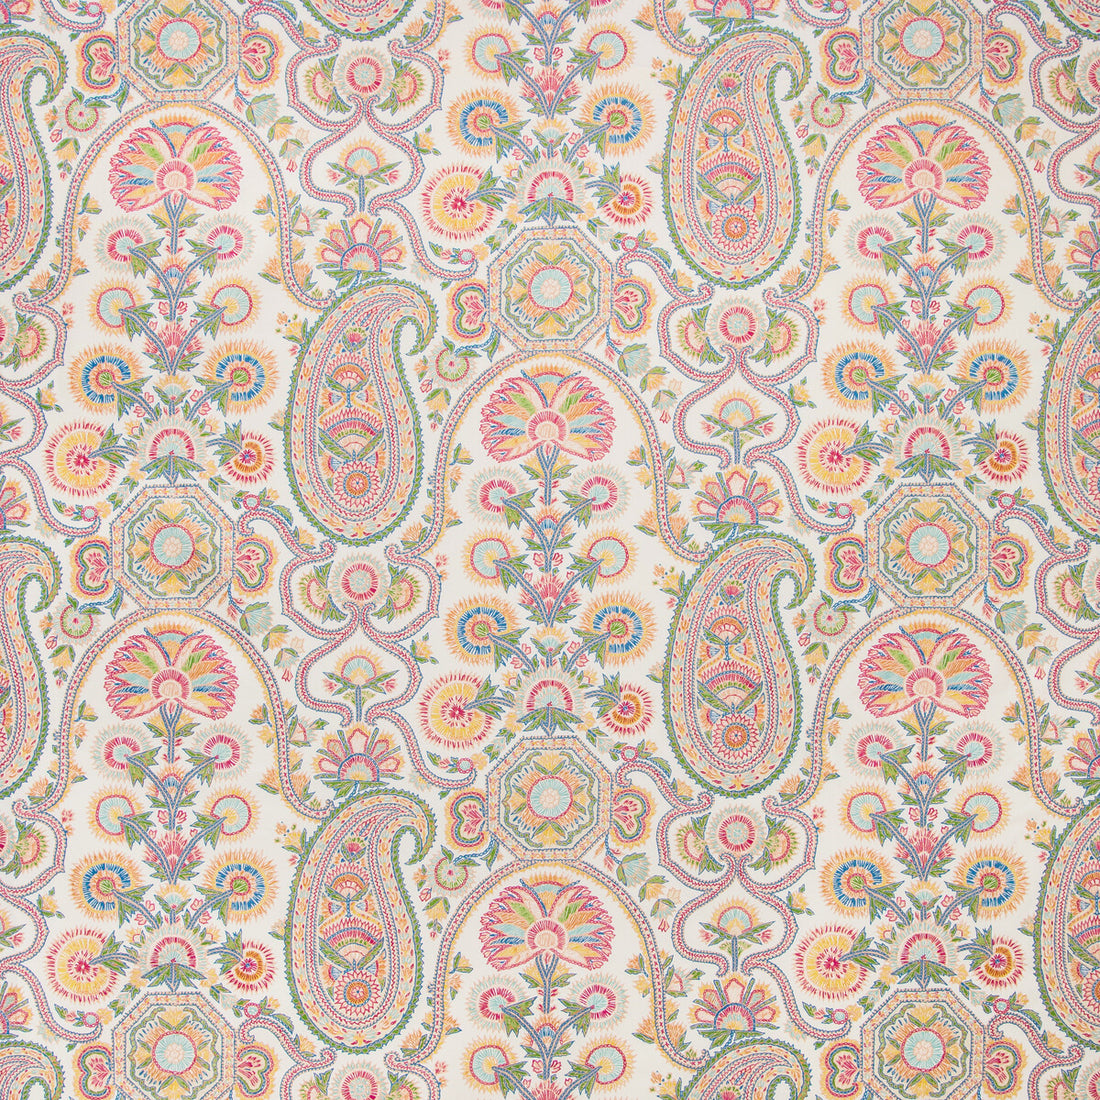 Saraya Print fabric in spring color - pattern 8020100.7354.0 - by Brunschwig &amp; Fils in the Grand Bazaar collection